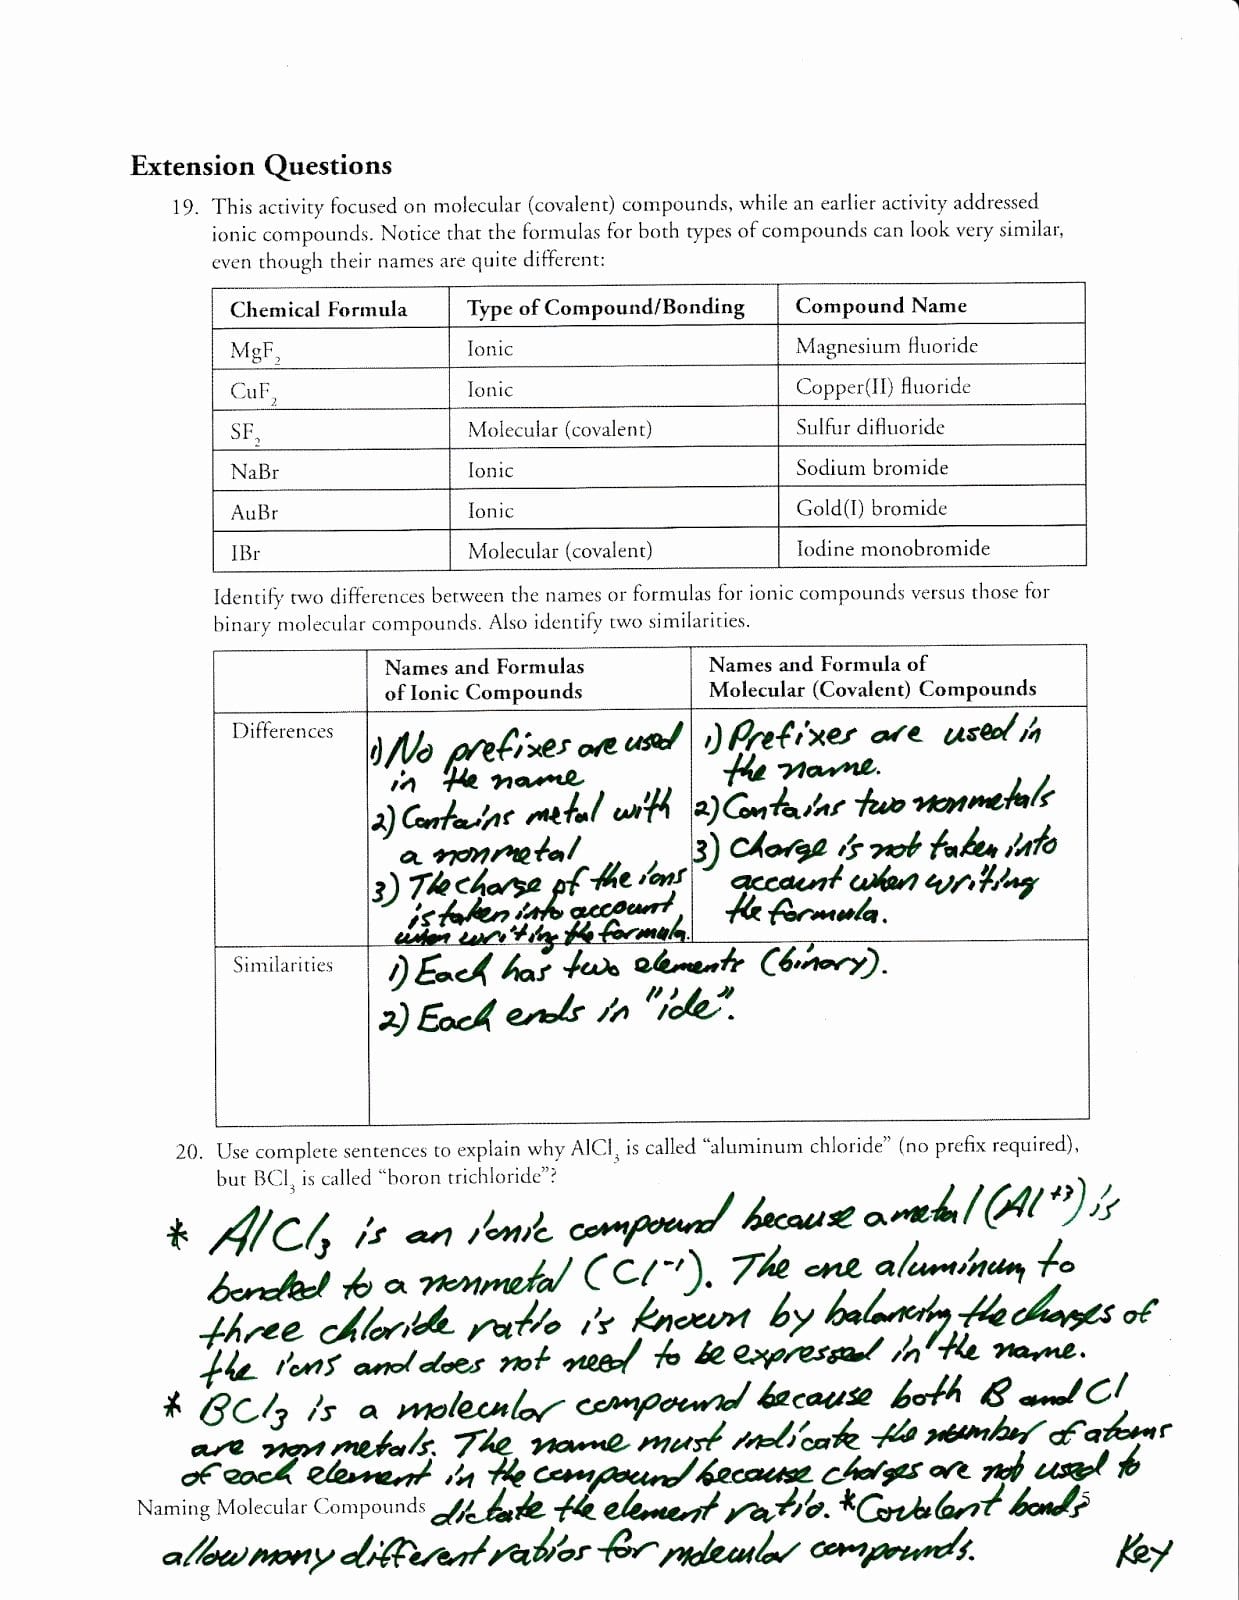 Protein Structure Pogil Worksheet Answers  Yooob Inside Protein Structure Pogil Worksheet Answers